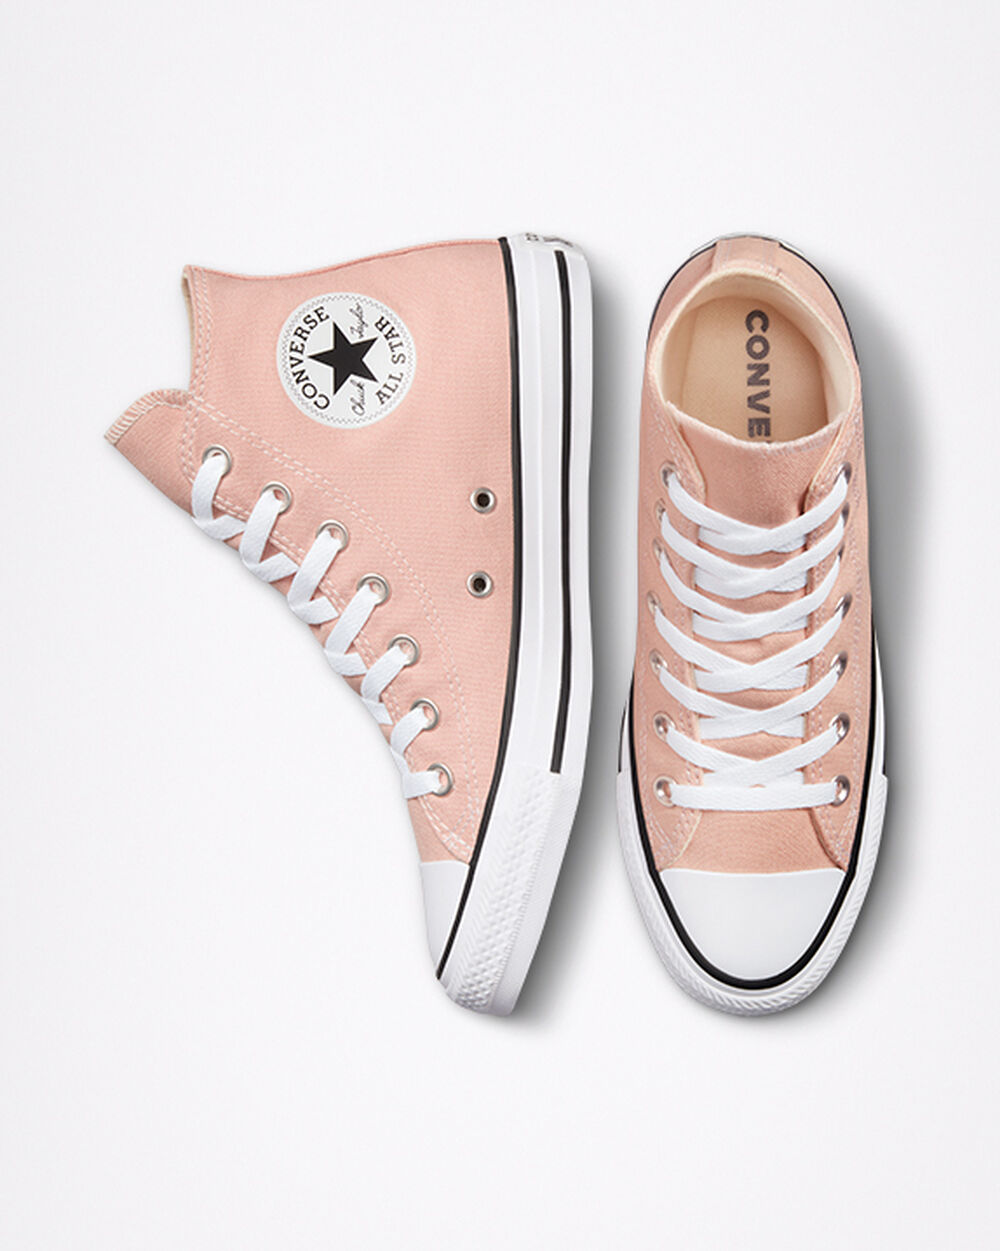 Tenis Converse Chuck Taylor All Star Mujer Rosas | Mexico-261066